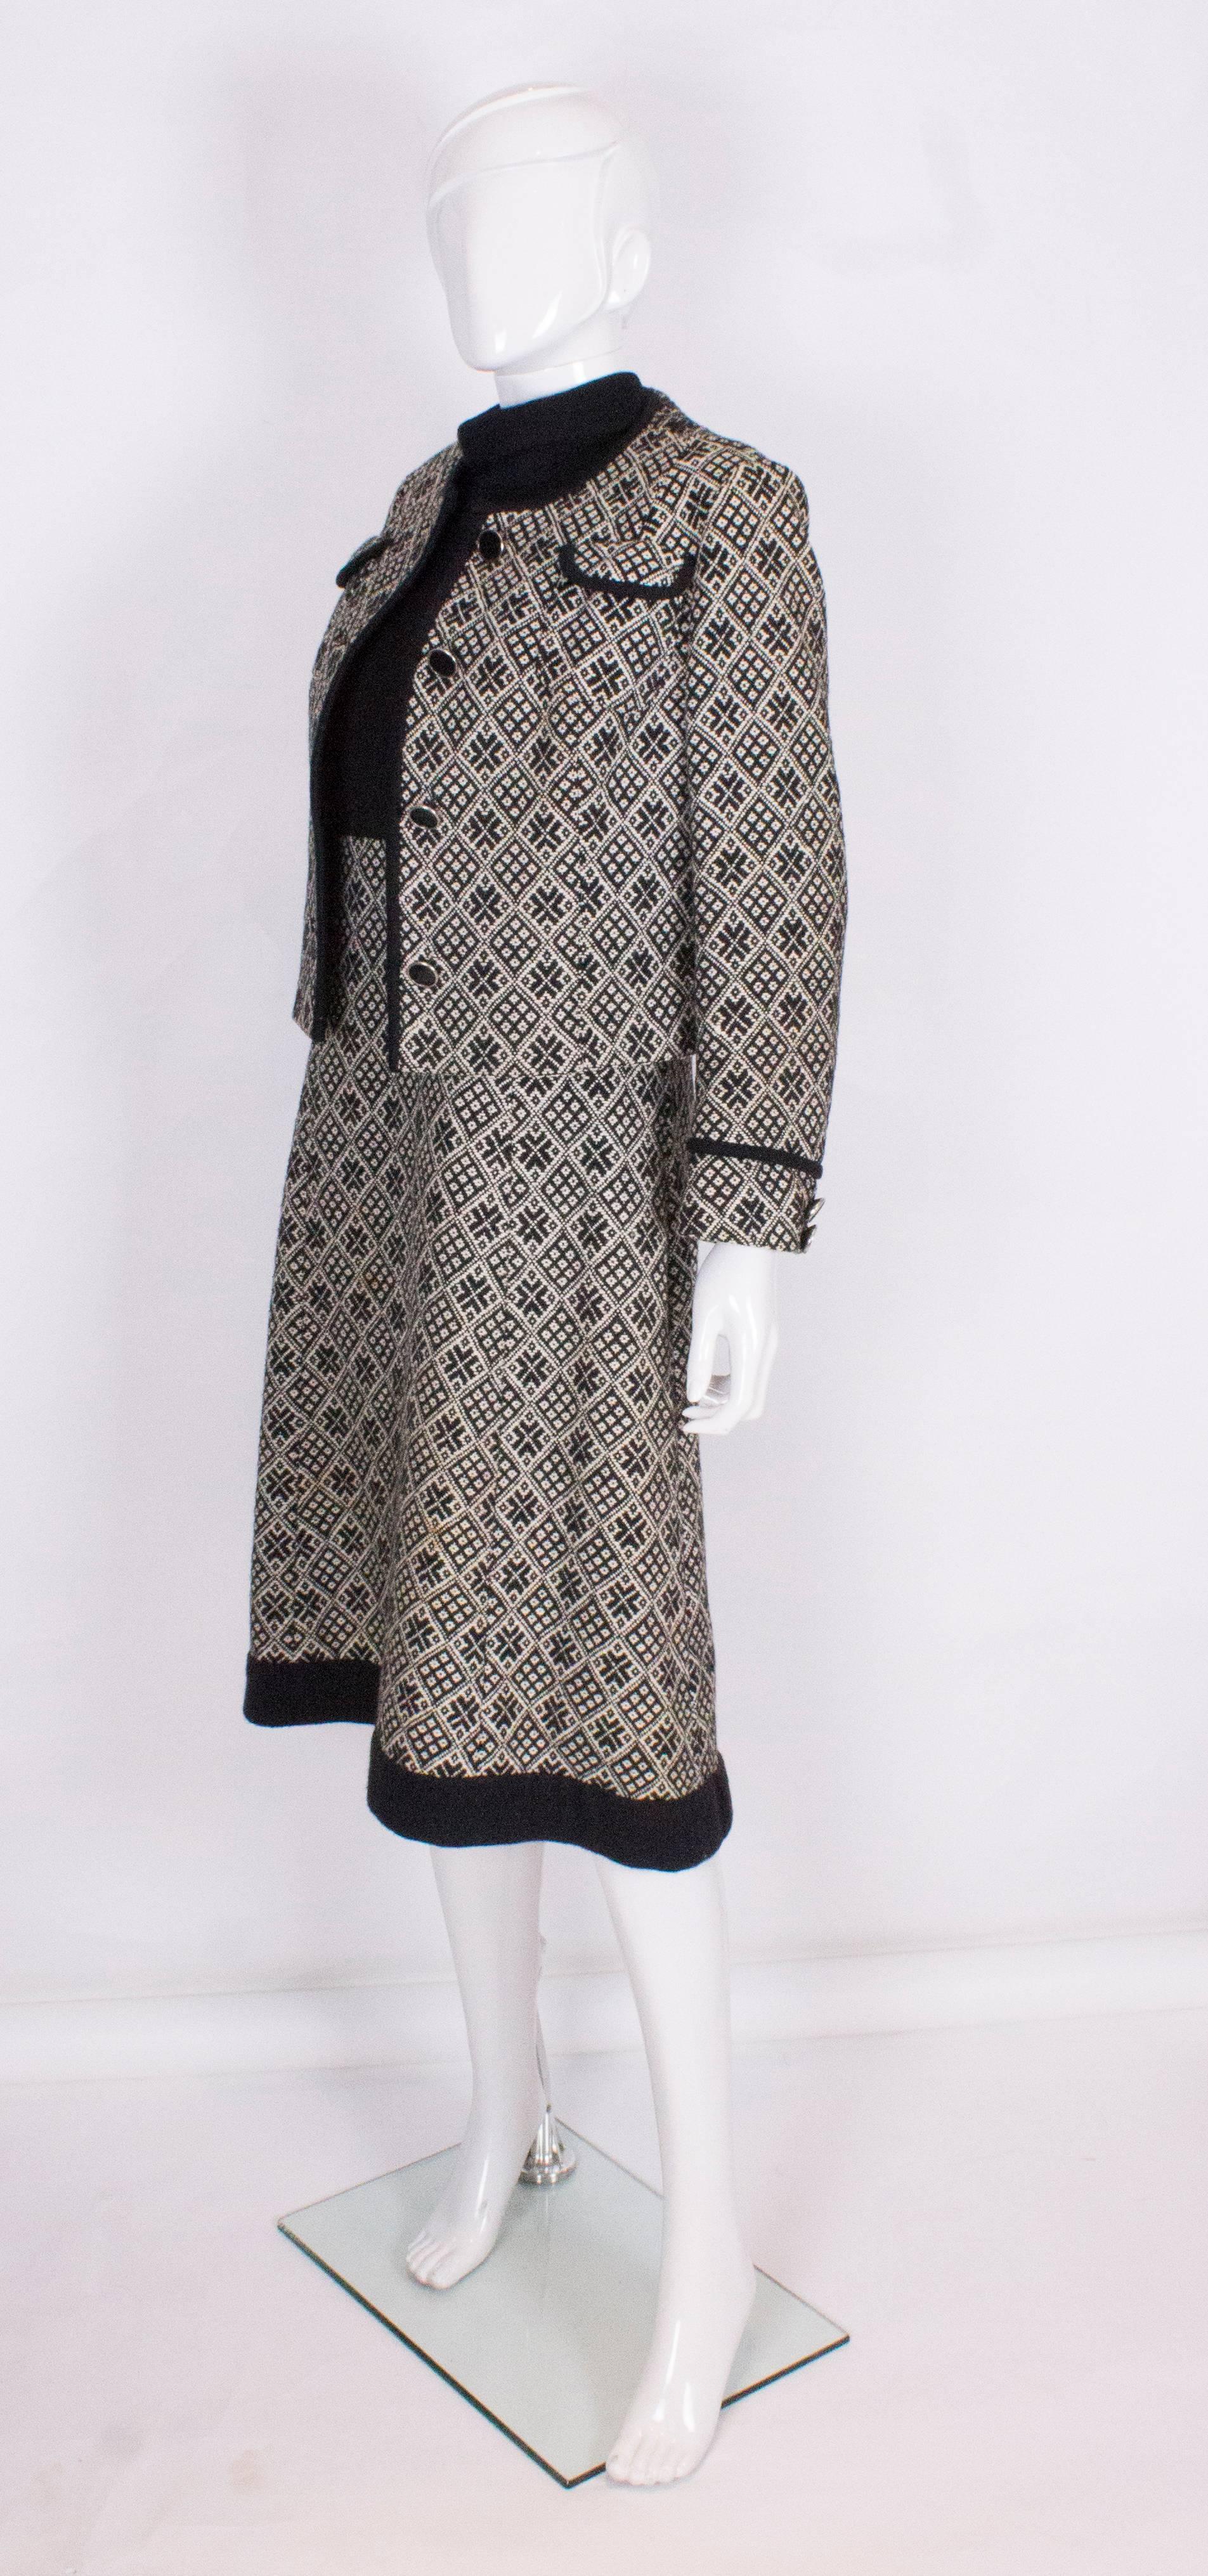 A chic outfit for Fall. The jacket has a four button front opening and there are 2 breast pockets and 2 buttons on each cuff. The dress has a roll neck, black body and trim at the hem. The body of the dress is the same black and white woven fabric